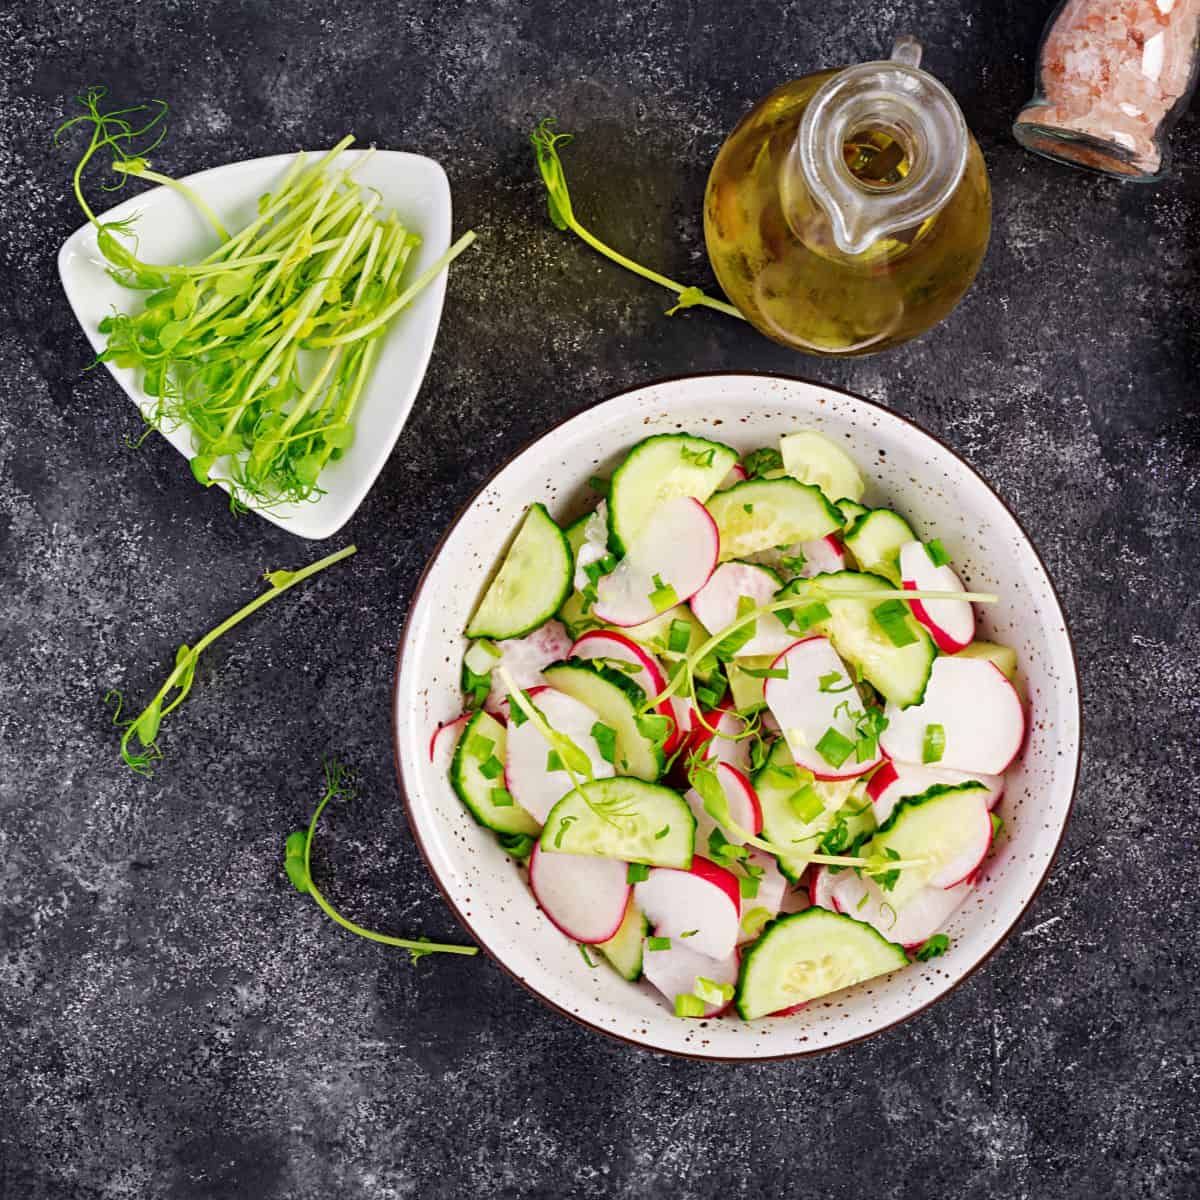 Sliced cucumbers and radishes in a white bowl on a black counter top with olive oil container on the side.